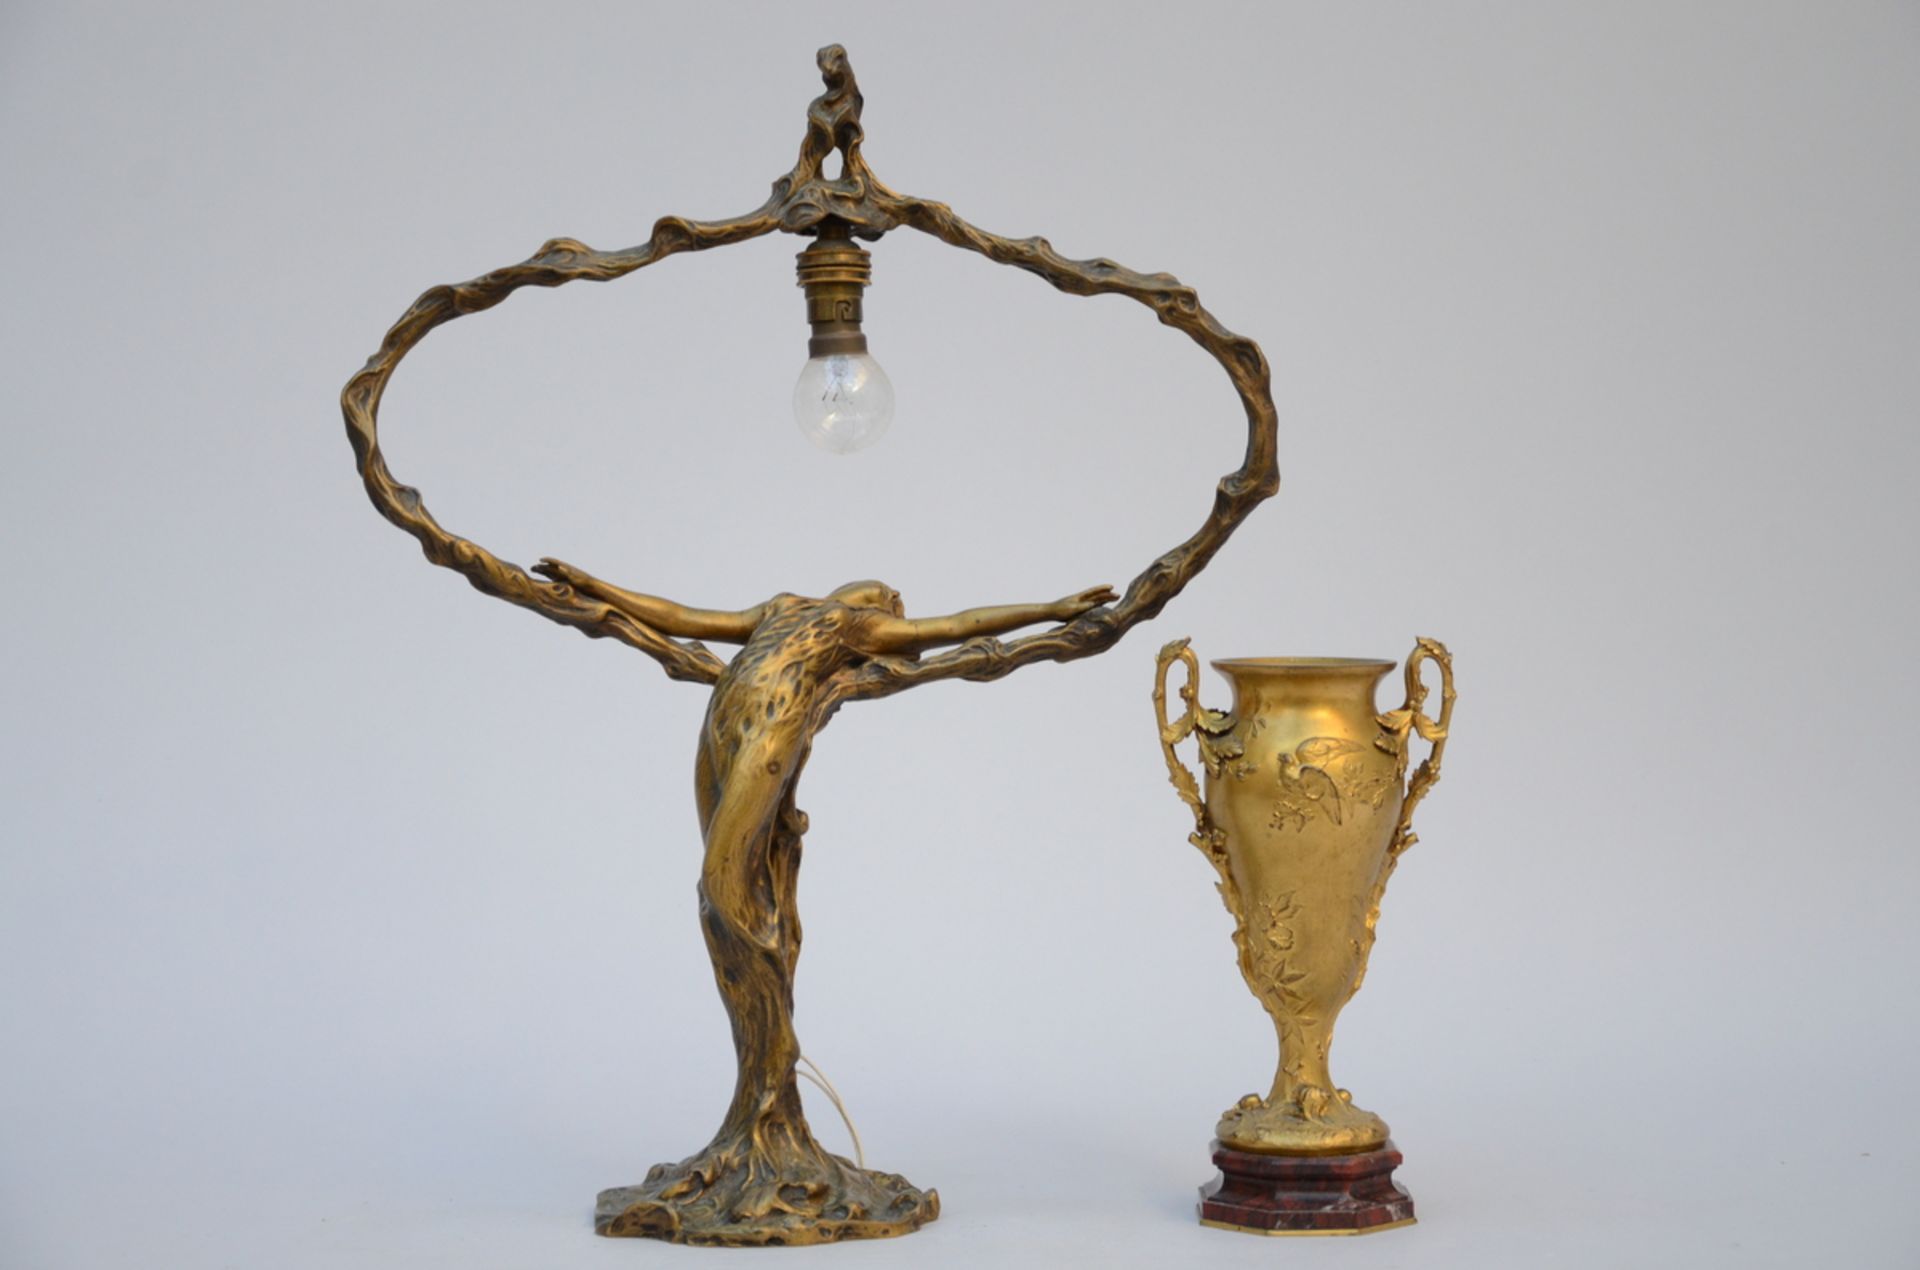 Lot: a gilt bronze lamp by Meliodon (52 x 41 cm) and an art nouveau vase in bronze by Barbedienne (